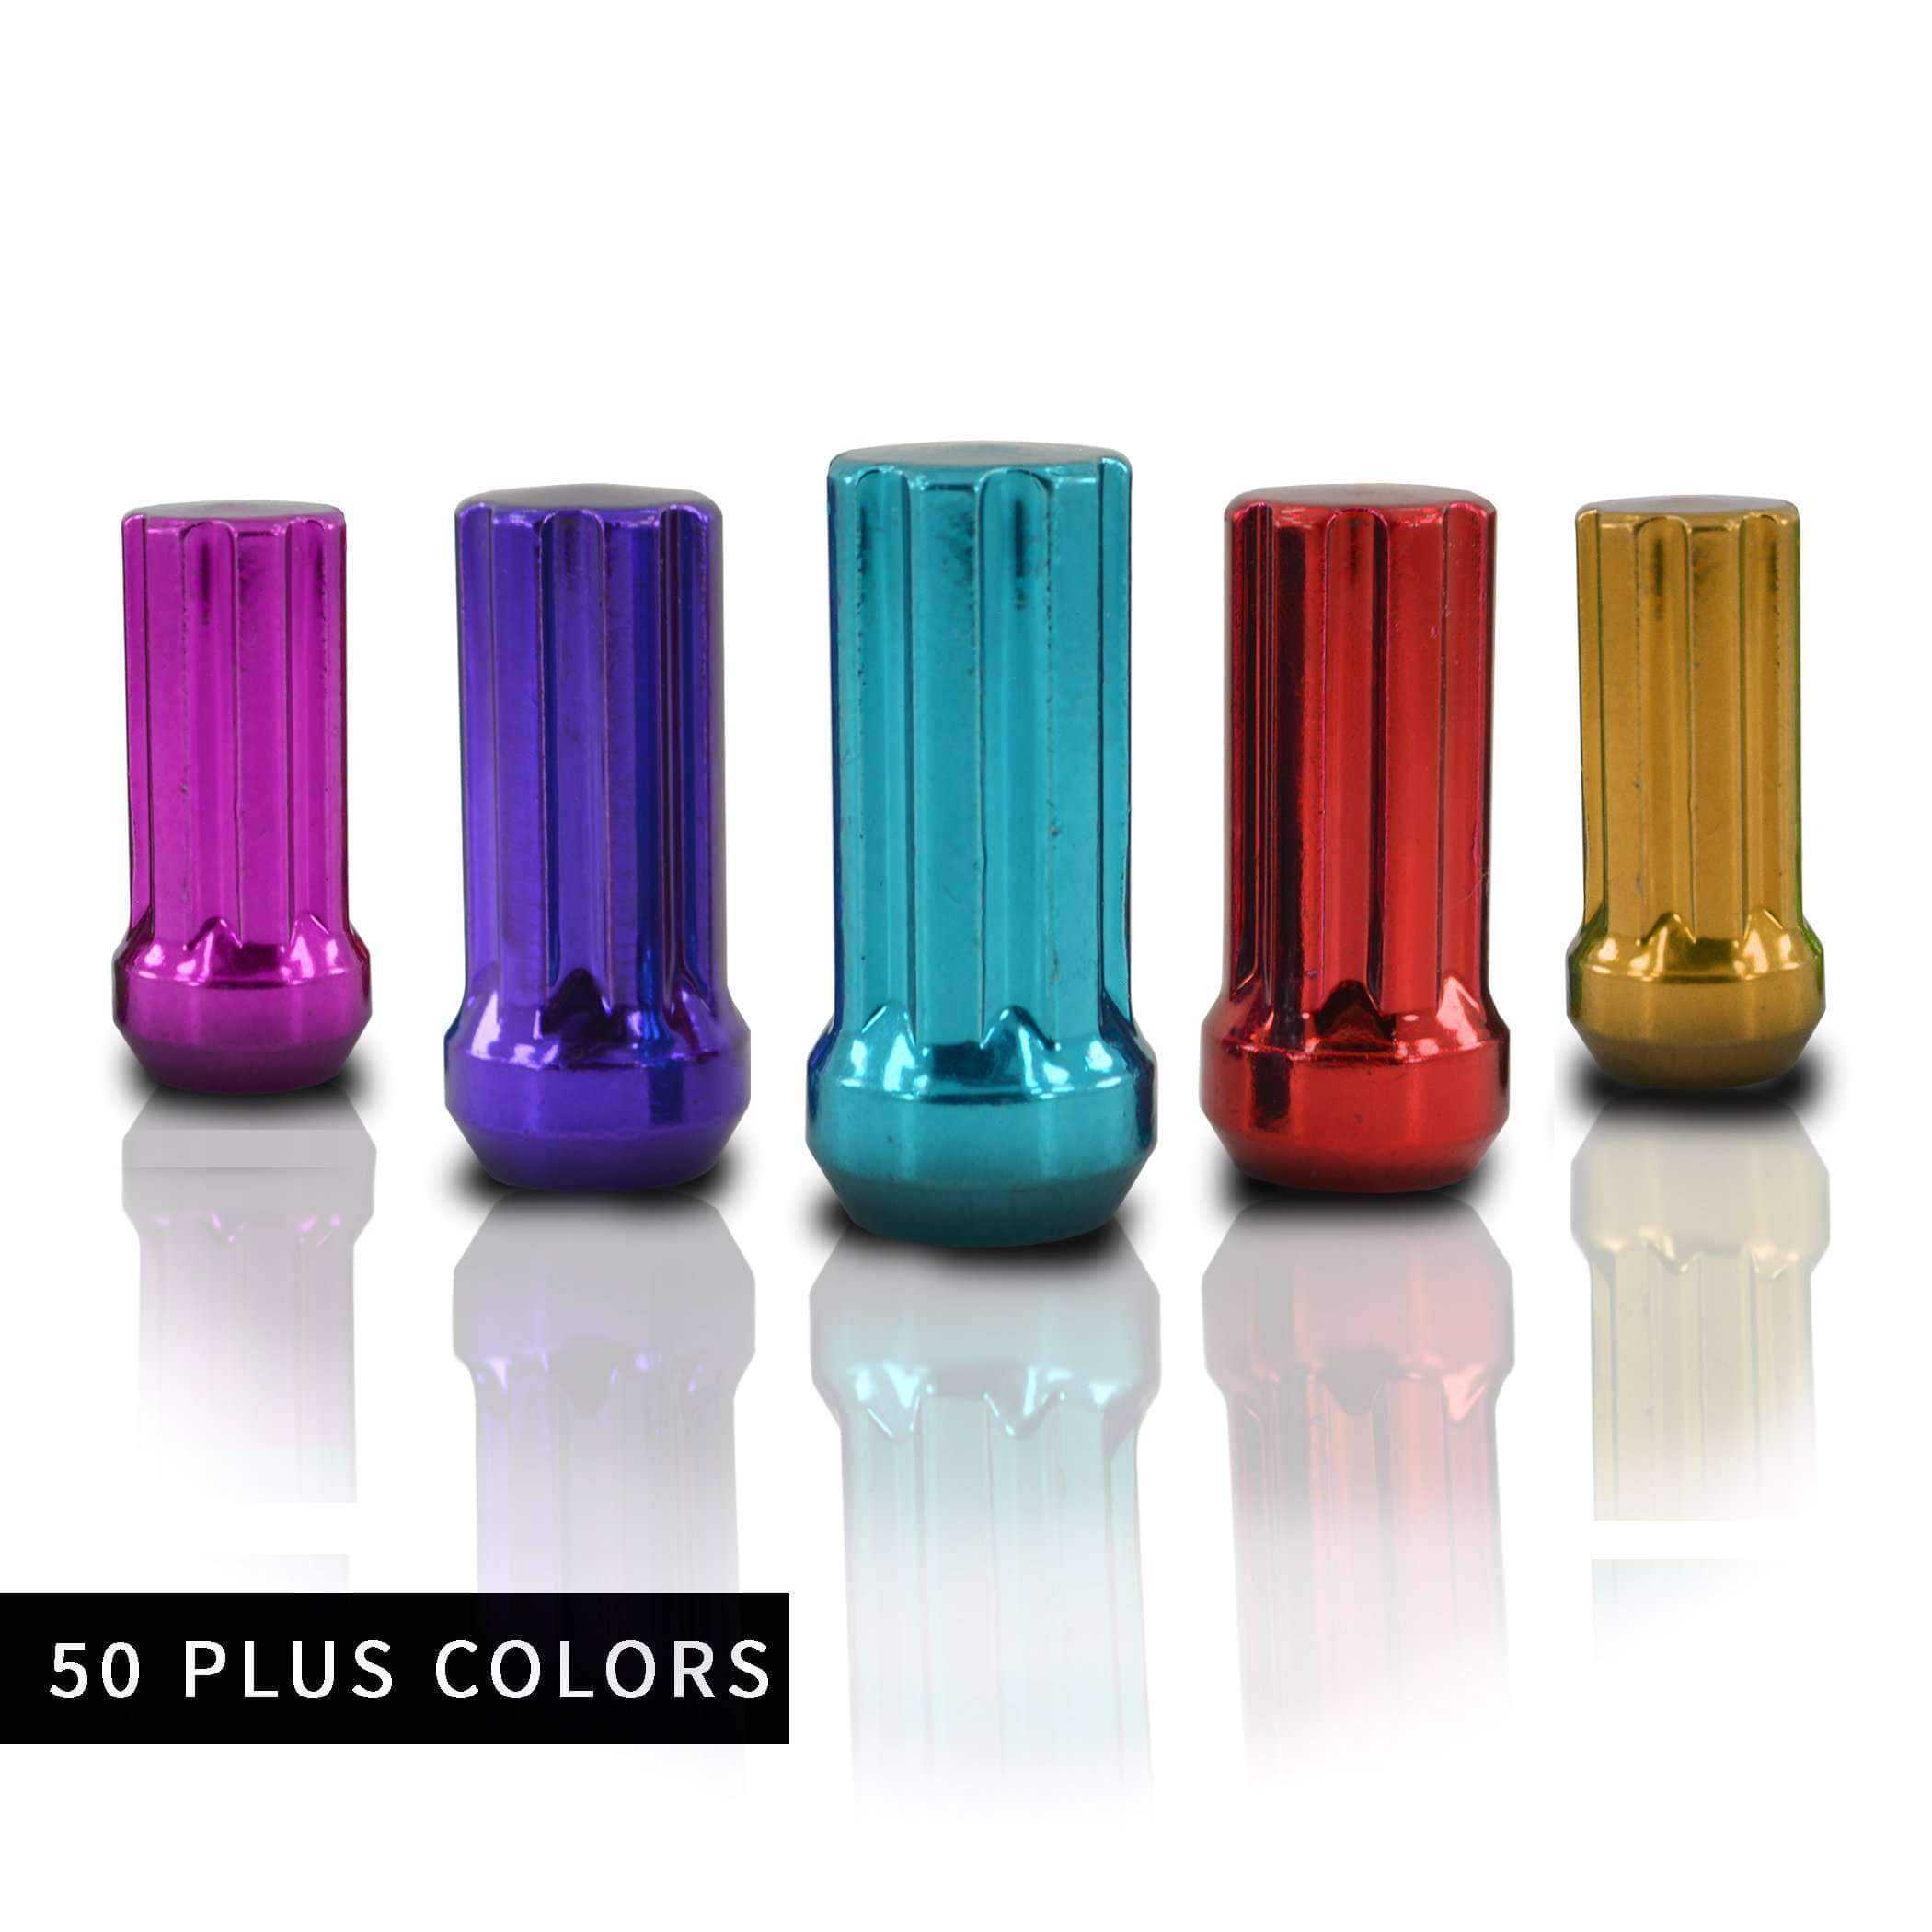 32 pc 14x2 main picture 7 Spline Duplex security lug nuts 2" Tall For Aftermarket Wheels powder coated durable coating